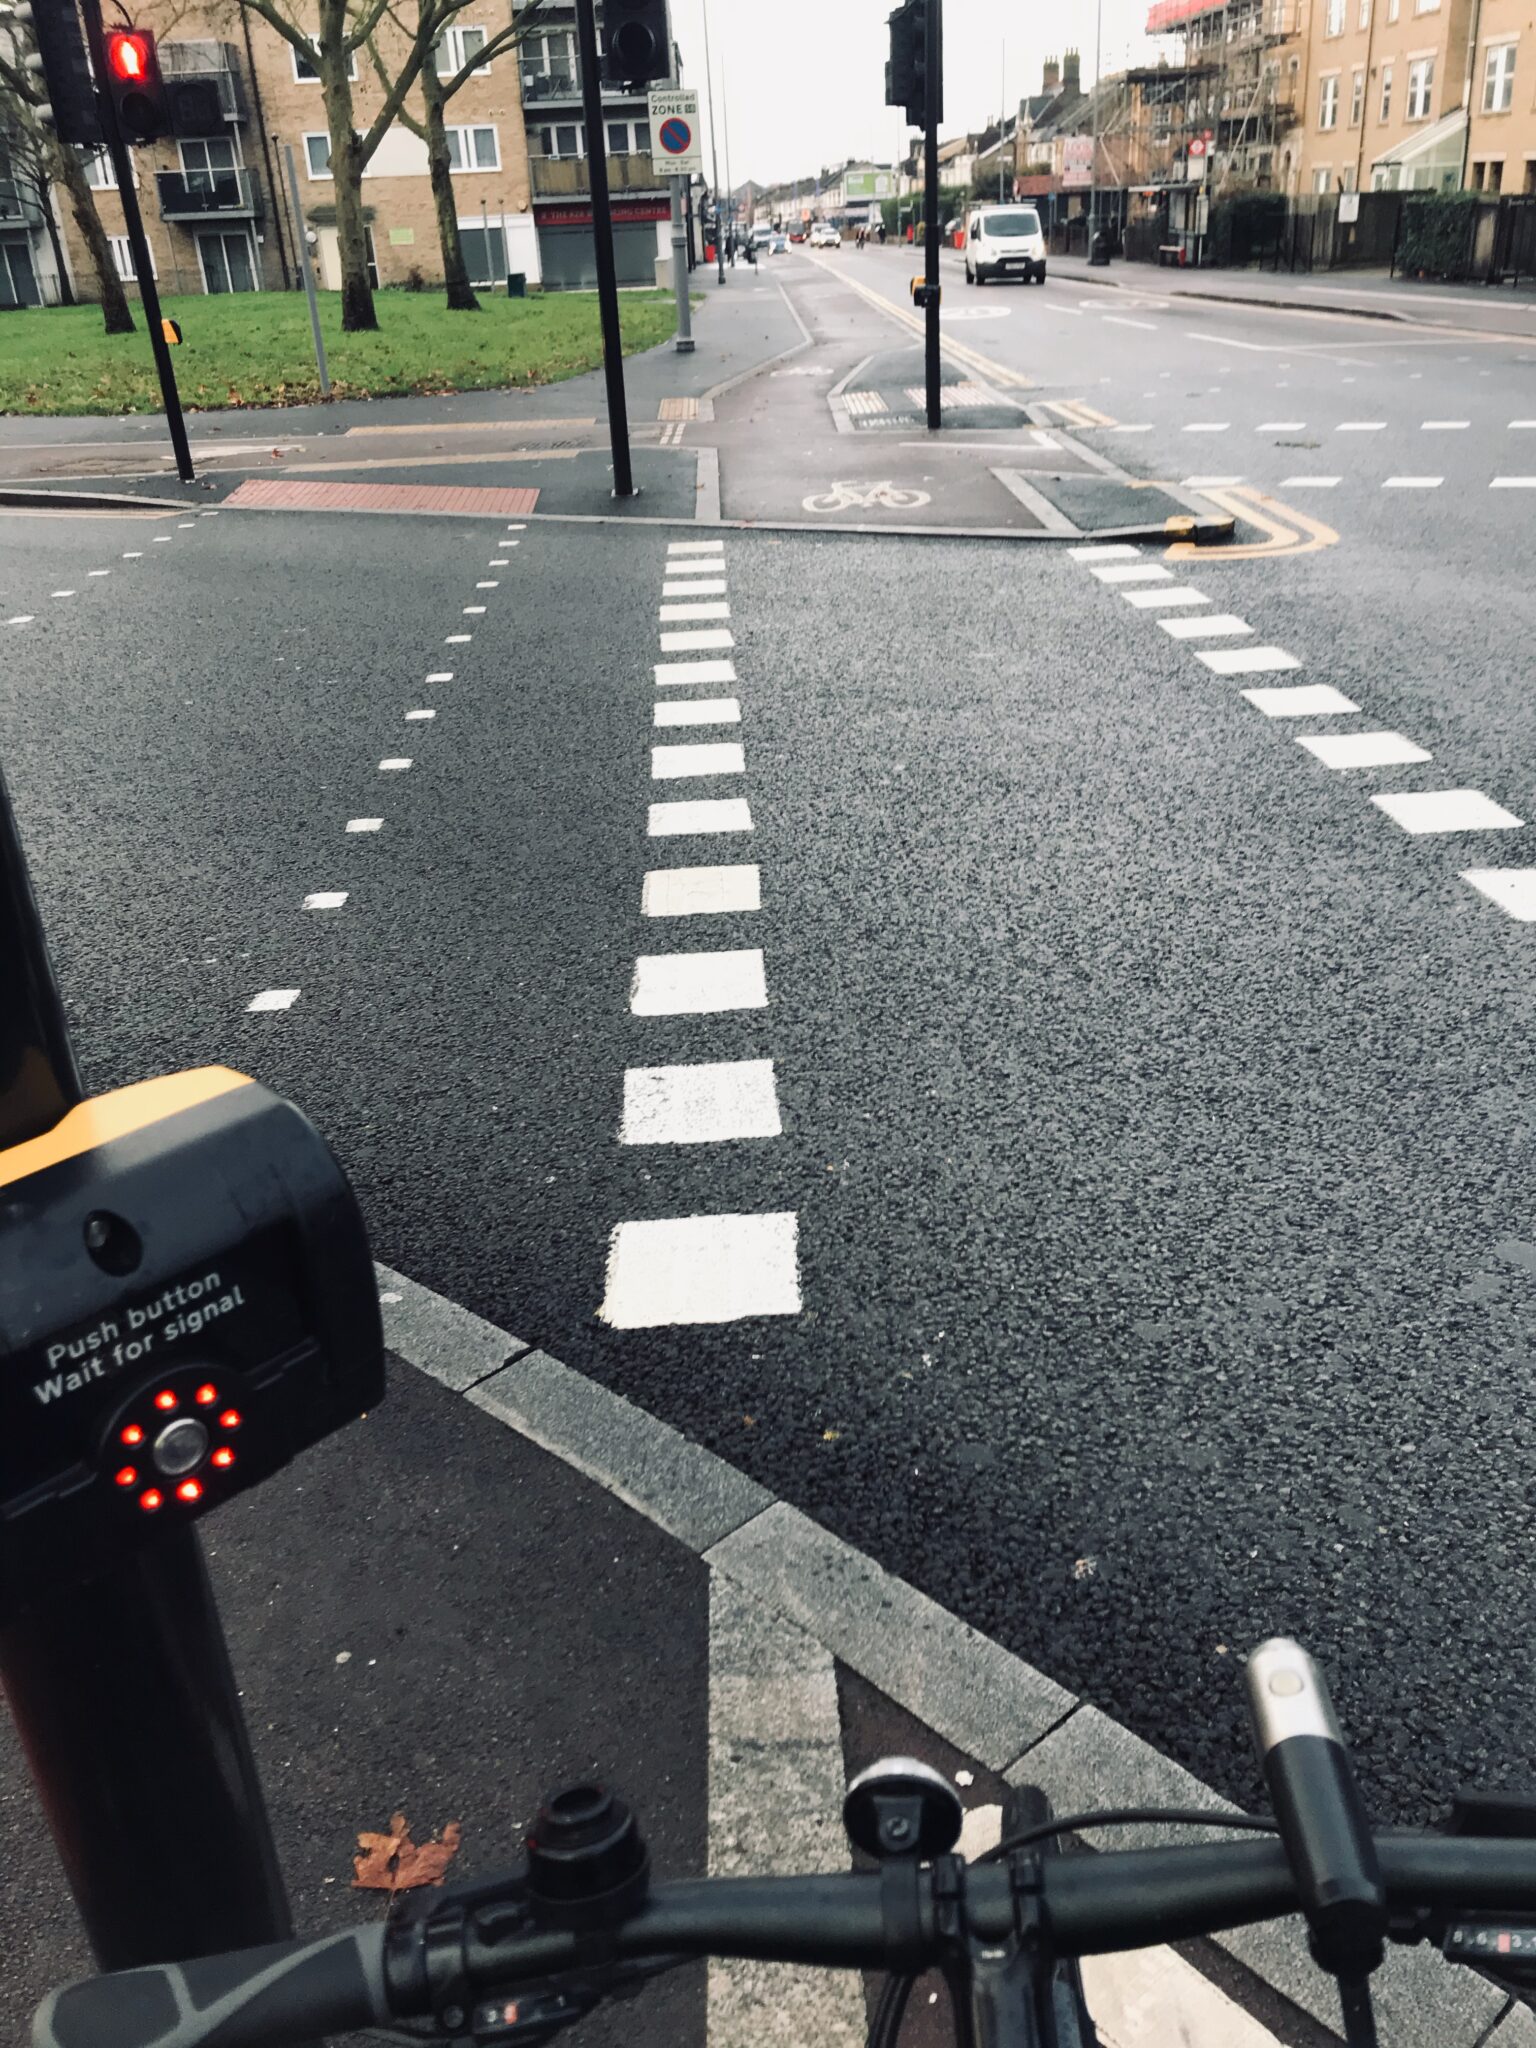 Image 7: A segregated (pedestrian and cycle) signalised crossing (Source: Chris Lord, Epping Forest Transport Action Group https://eftag.org.uk/tales-of-a-cycling-commuter-3-the-lea-bridge-road-lights/)